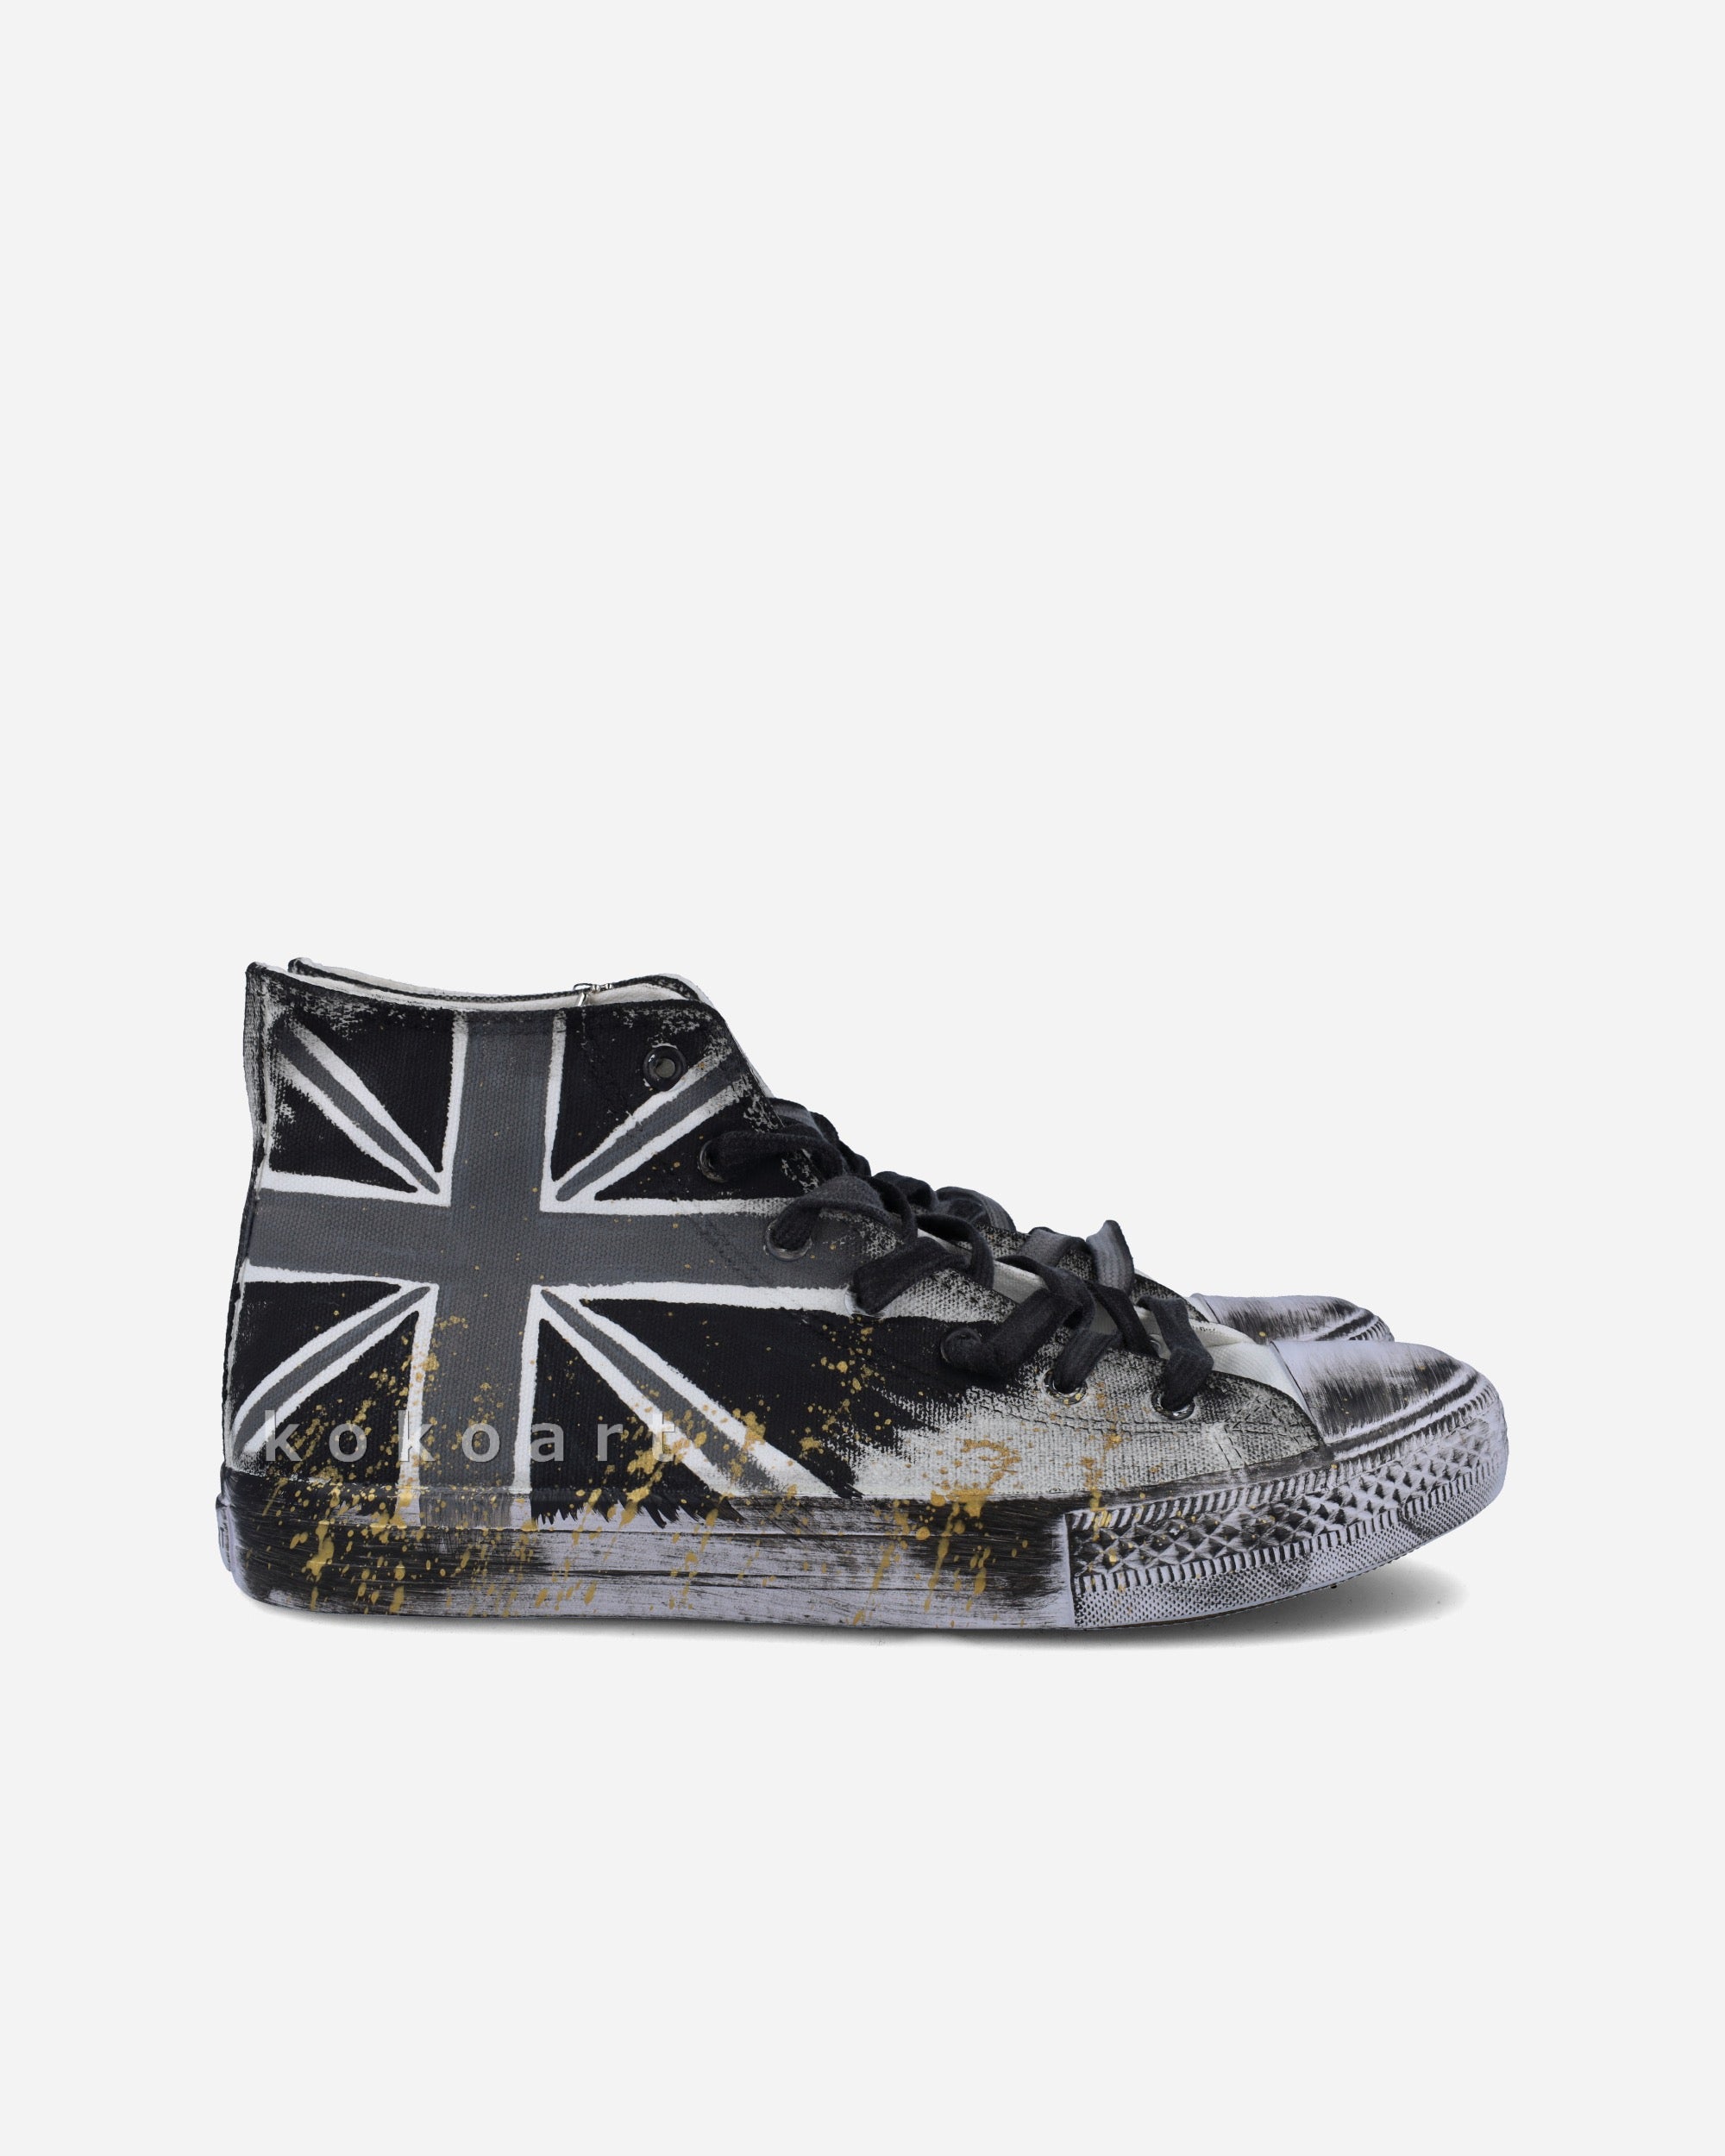 Flag Black & White Hand Painted Shoes